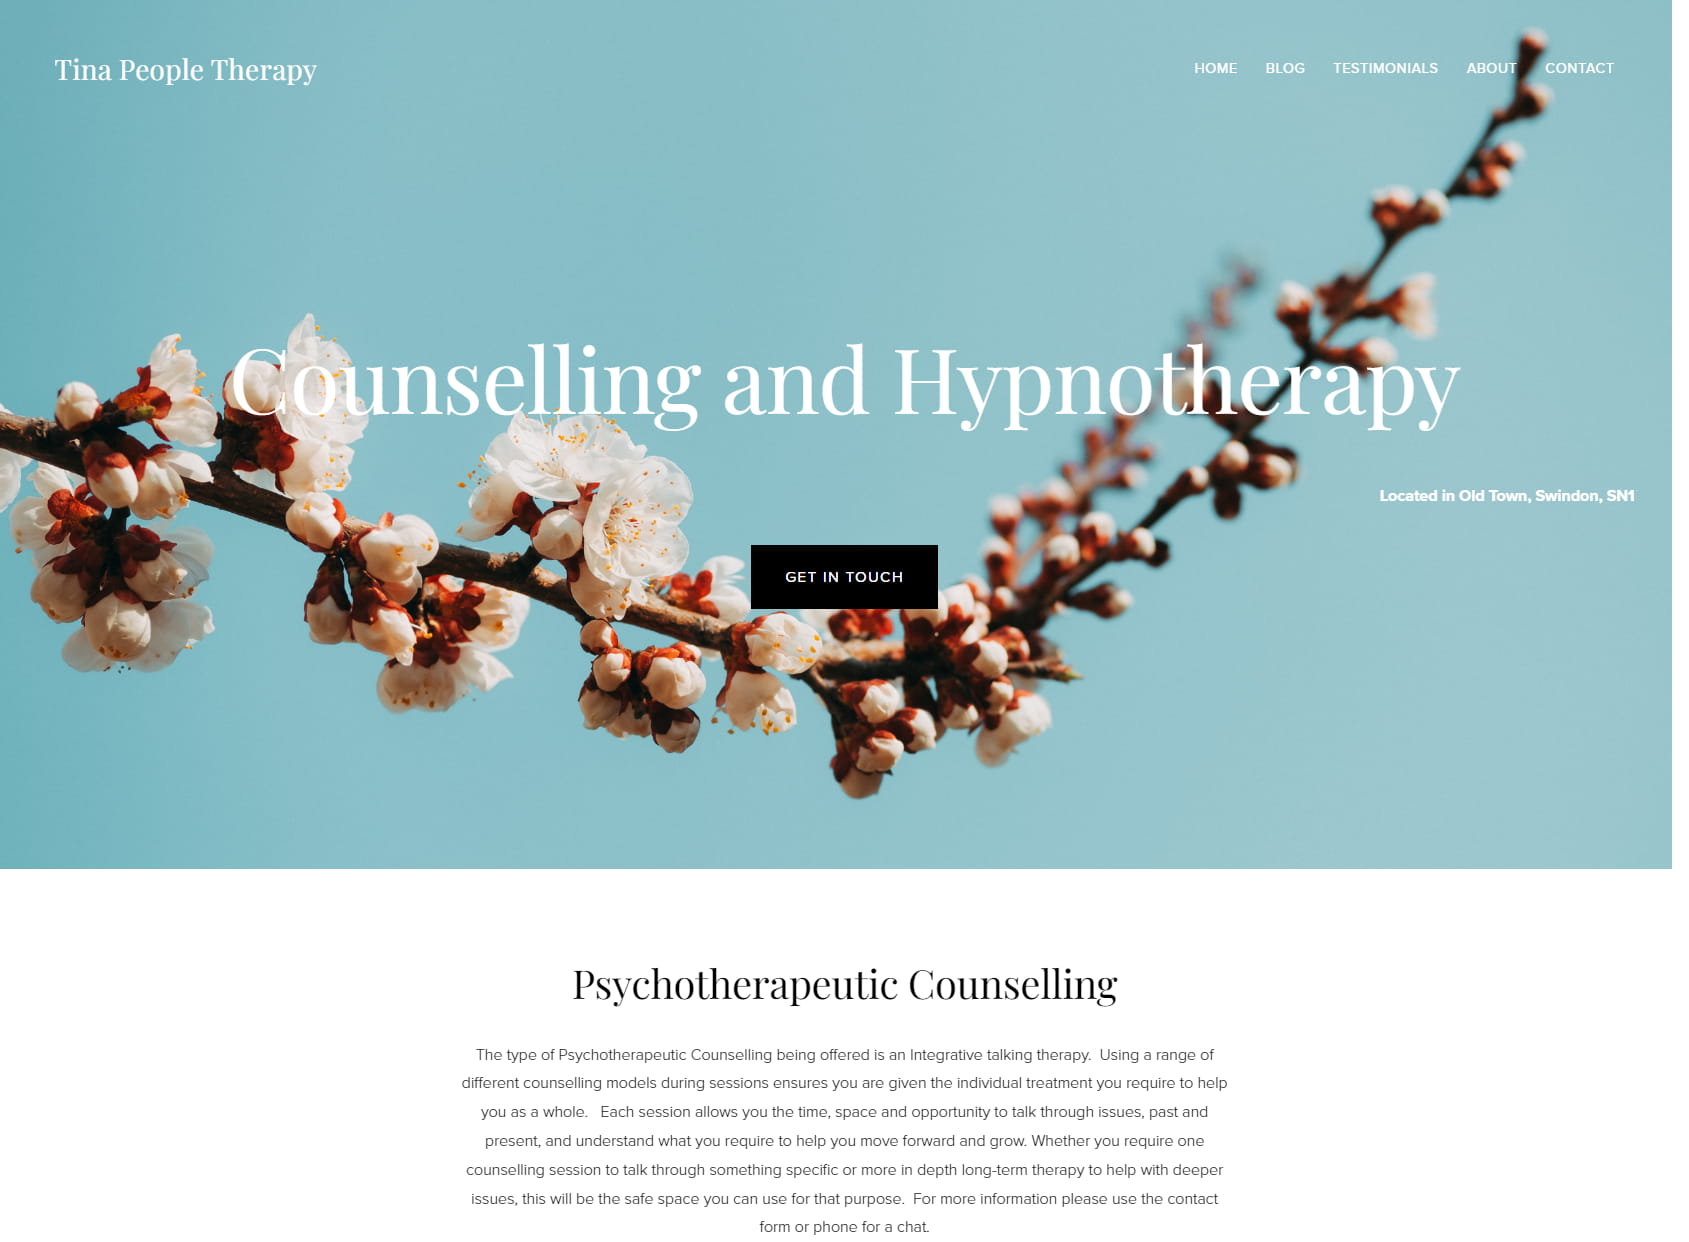 Tina People Counselling and Hypnotherapy